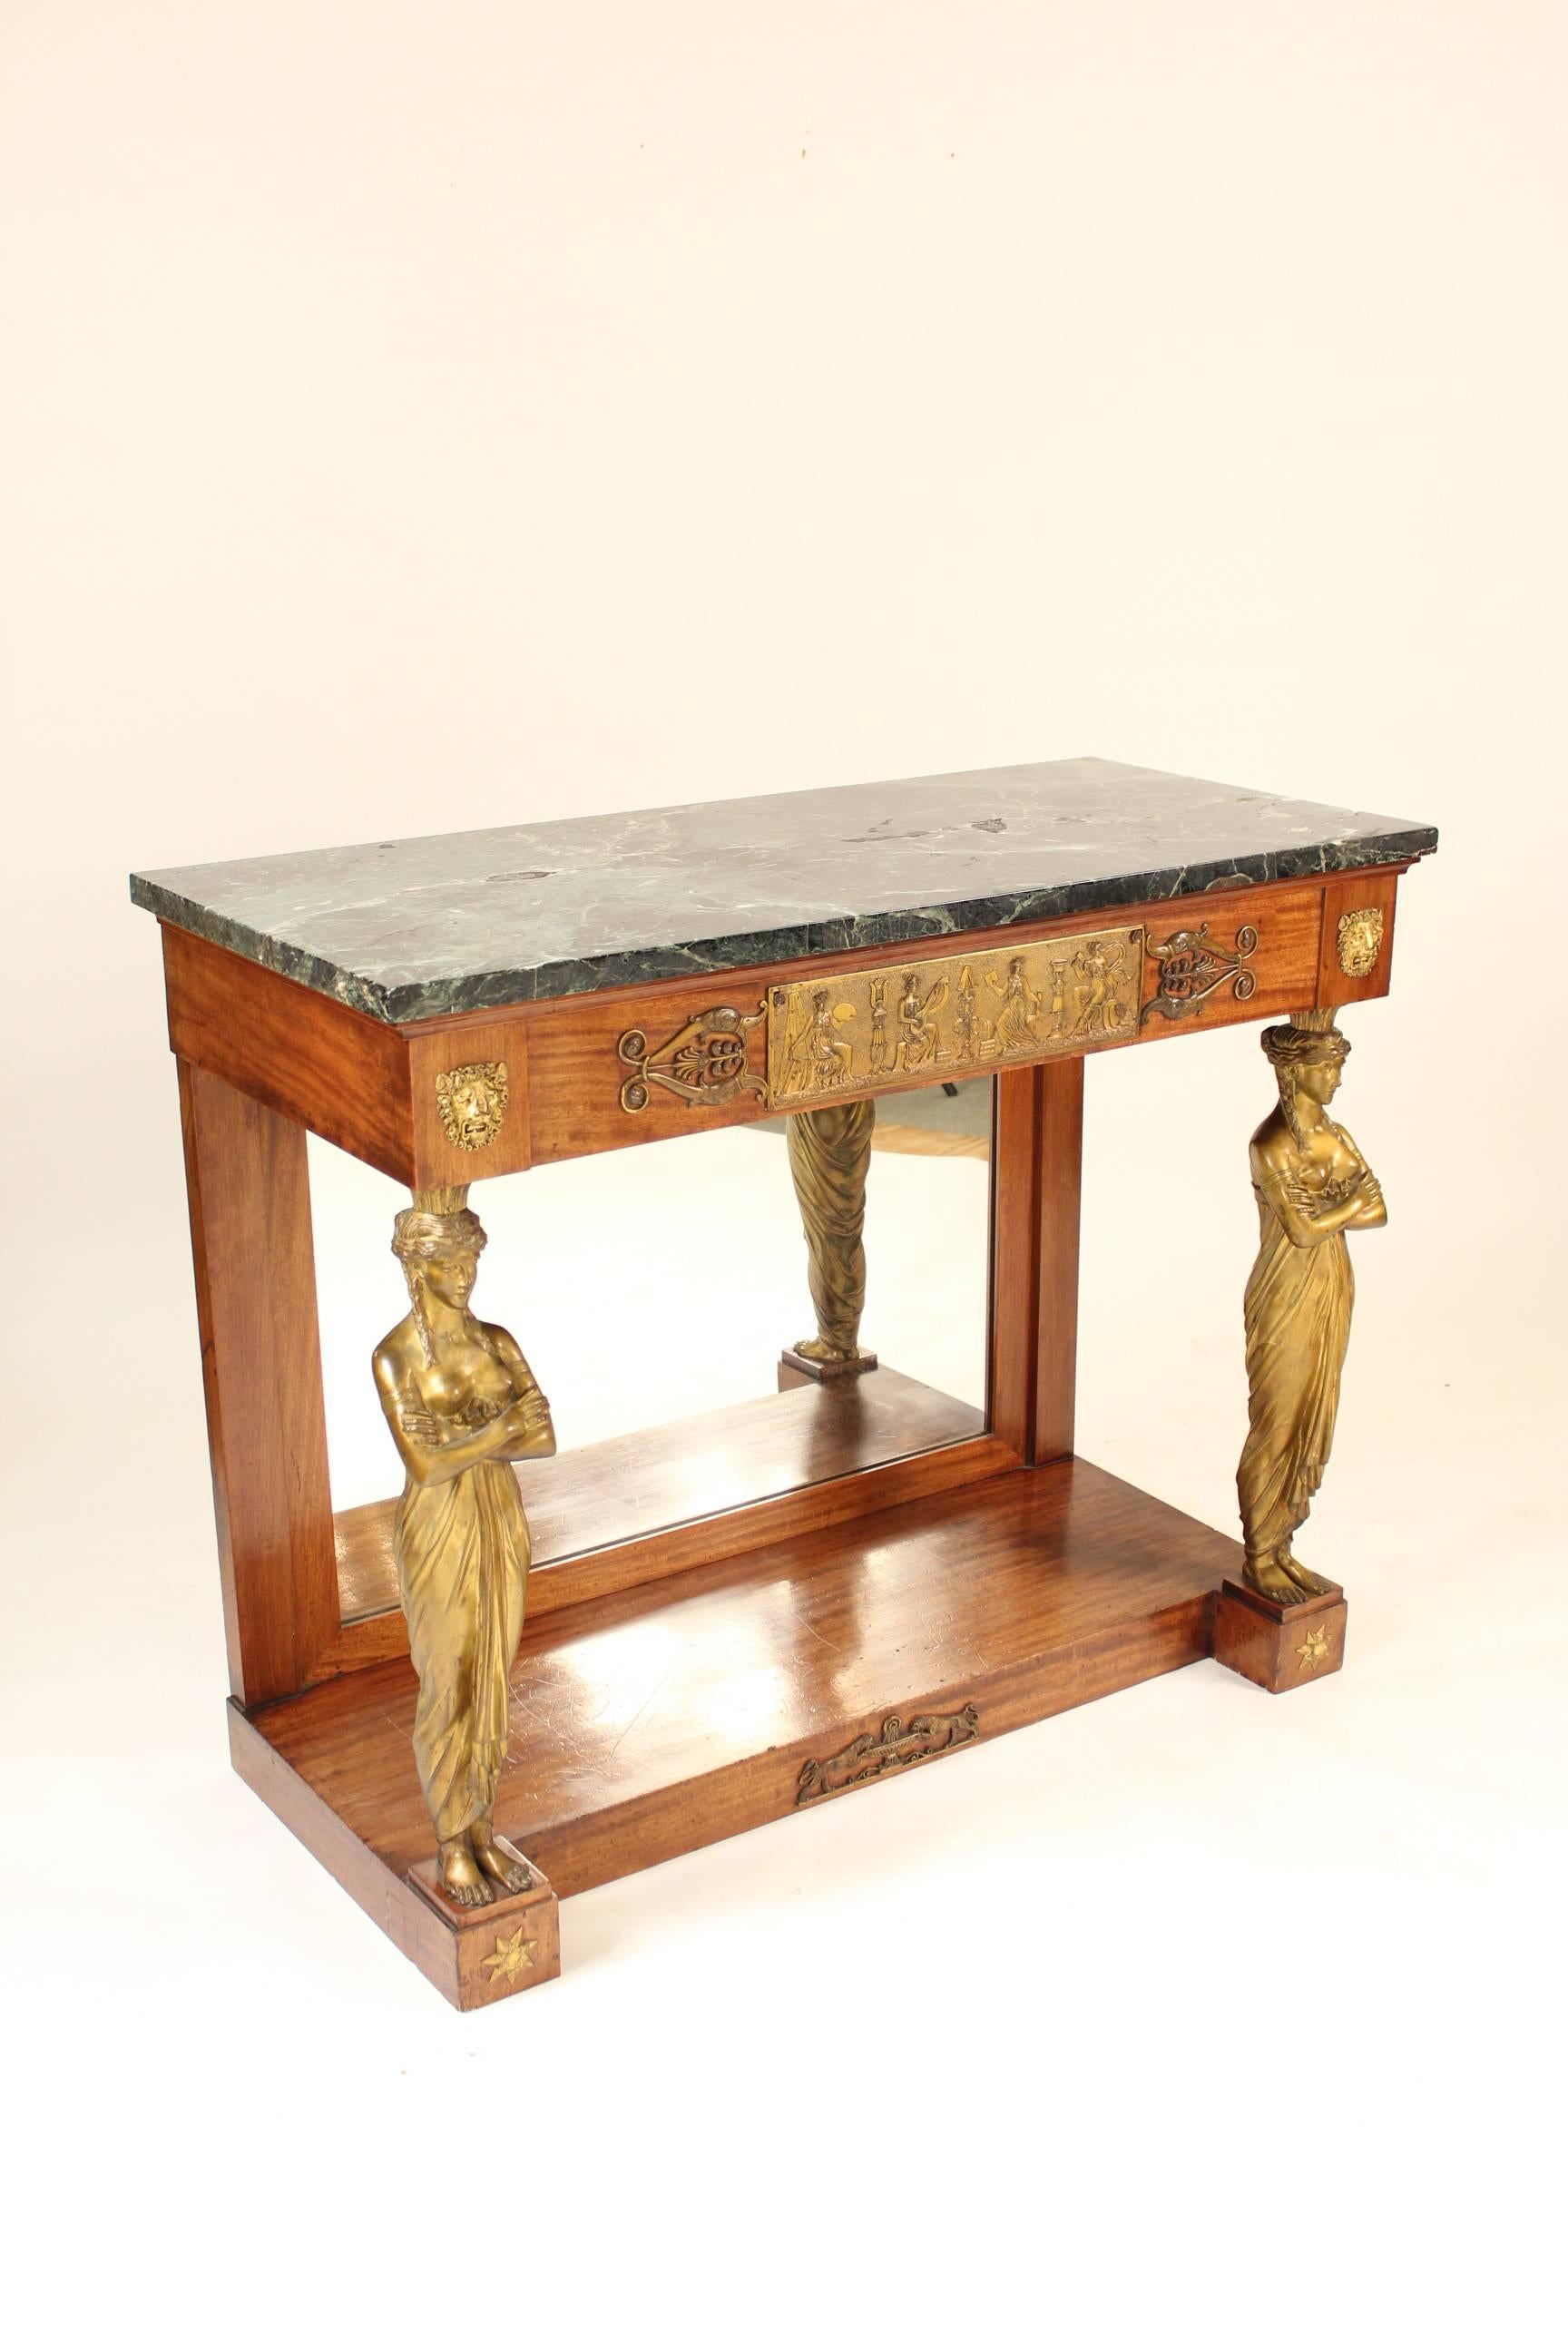 Empire style gilt bronze-mounted mahogany console table with a green marble top, circa 1920. Having a rectangular marble-top, a frieze with a bronze plaque with four muses, supported by two large gilt bronze caratid's.